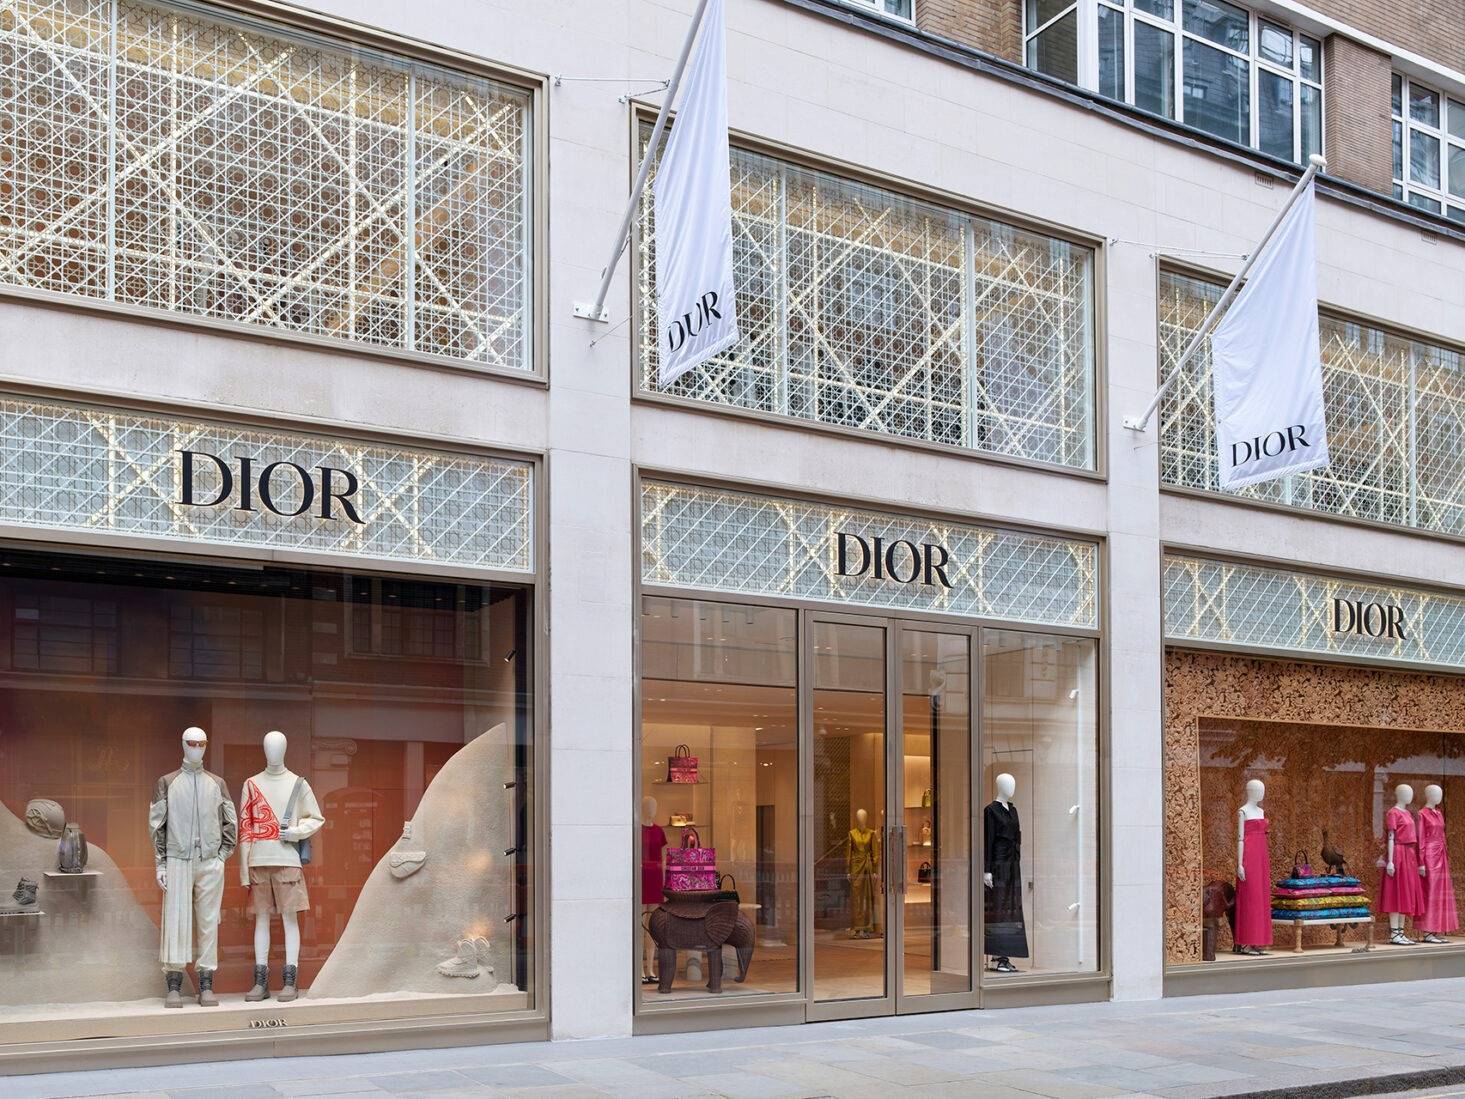 Crofton & Park Offer Various Luxurious Shopping Experiences from some of the worlds most famous brands